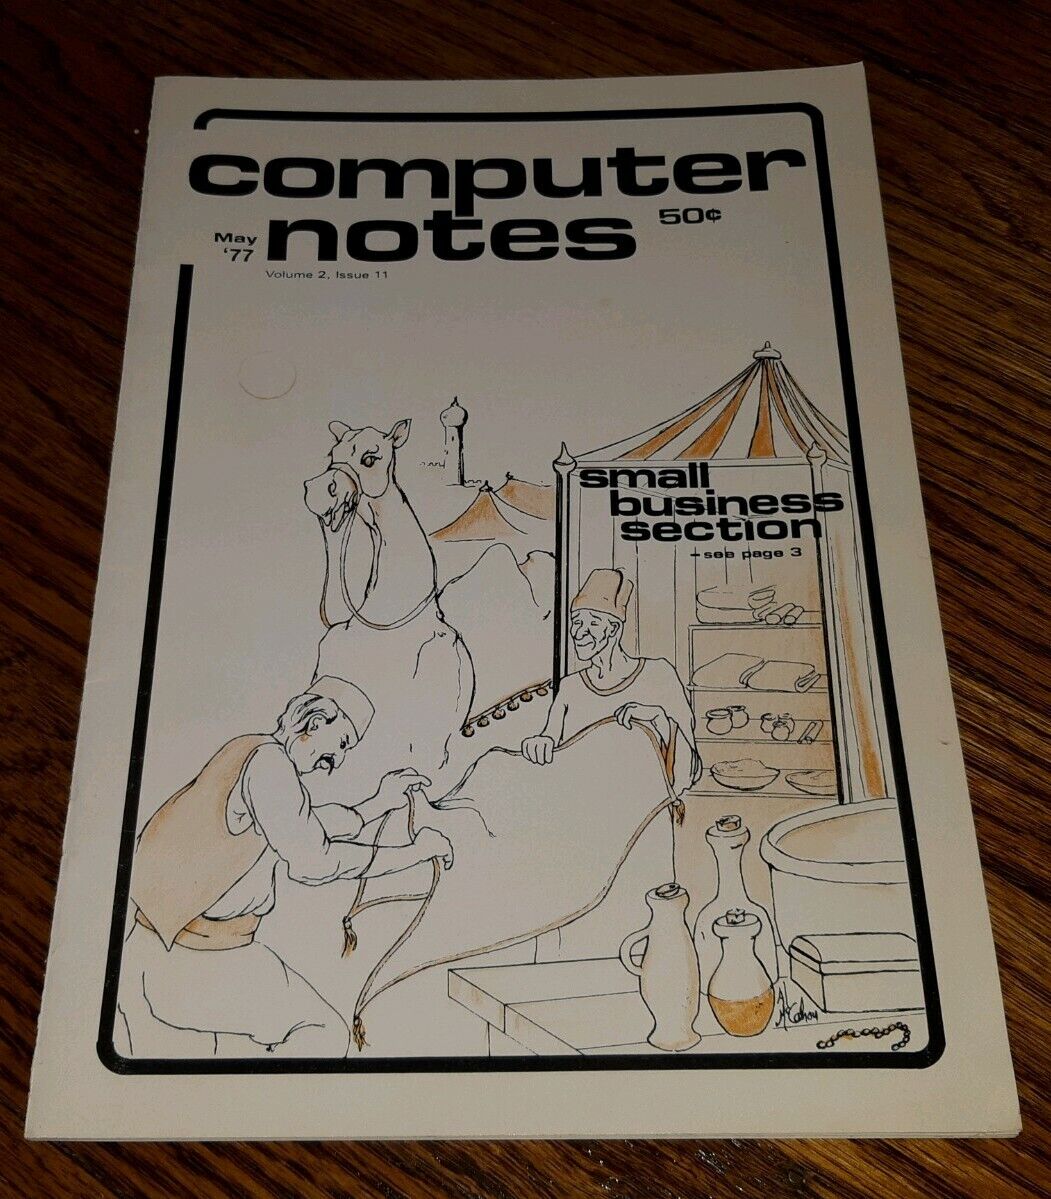 MITS Altair Computer Notes Magazine MAY 1977 Volume 2 Issue 11 ORIGINAL VTG BOOK